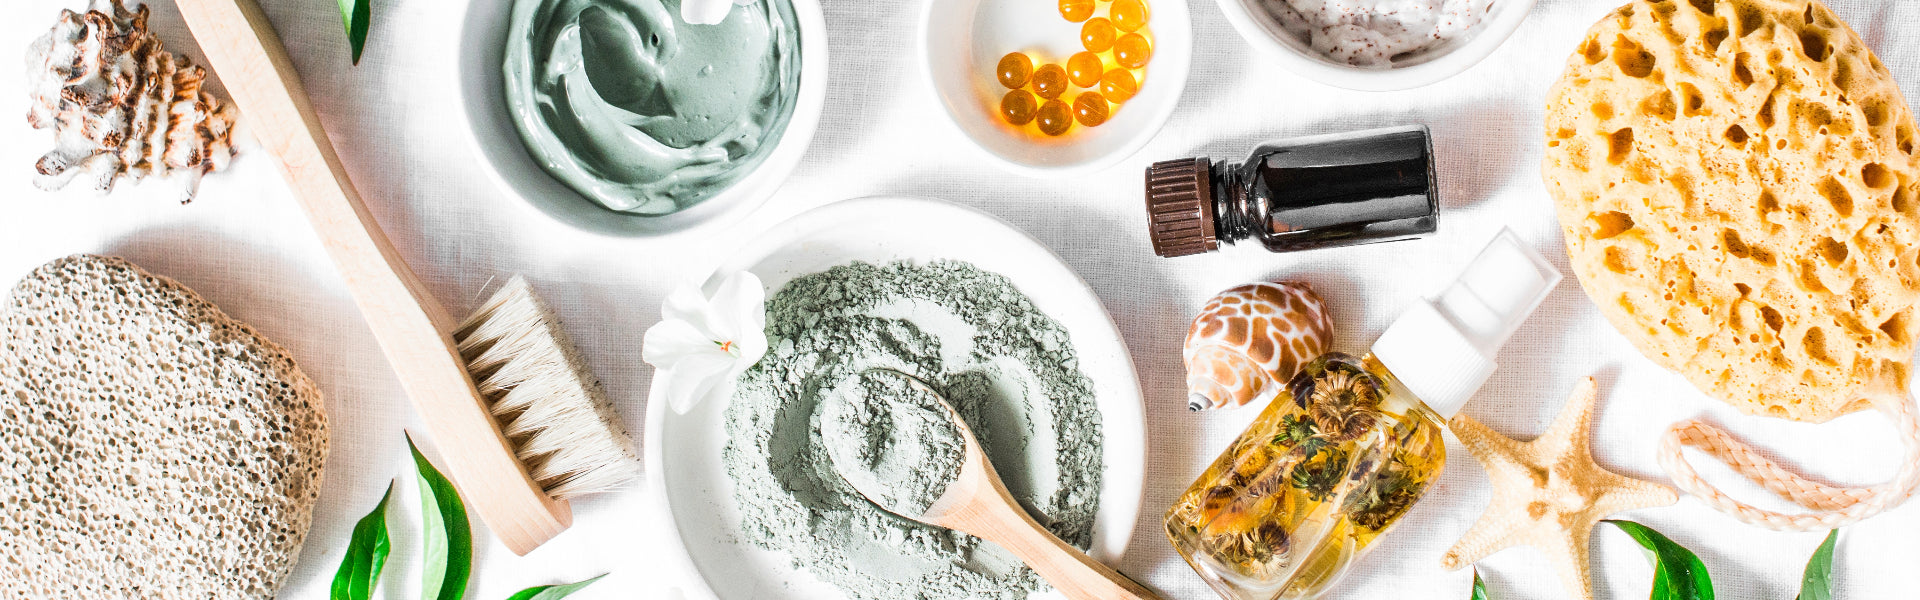 Different organic ingredients to make organic DIY products for health and beauty